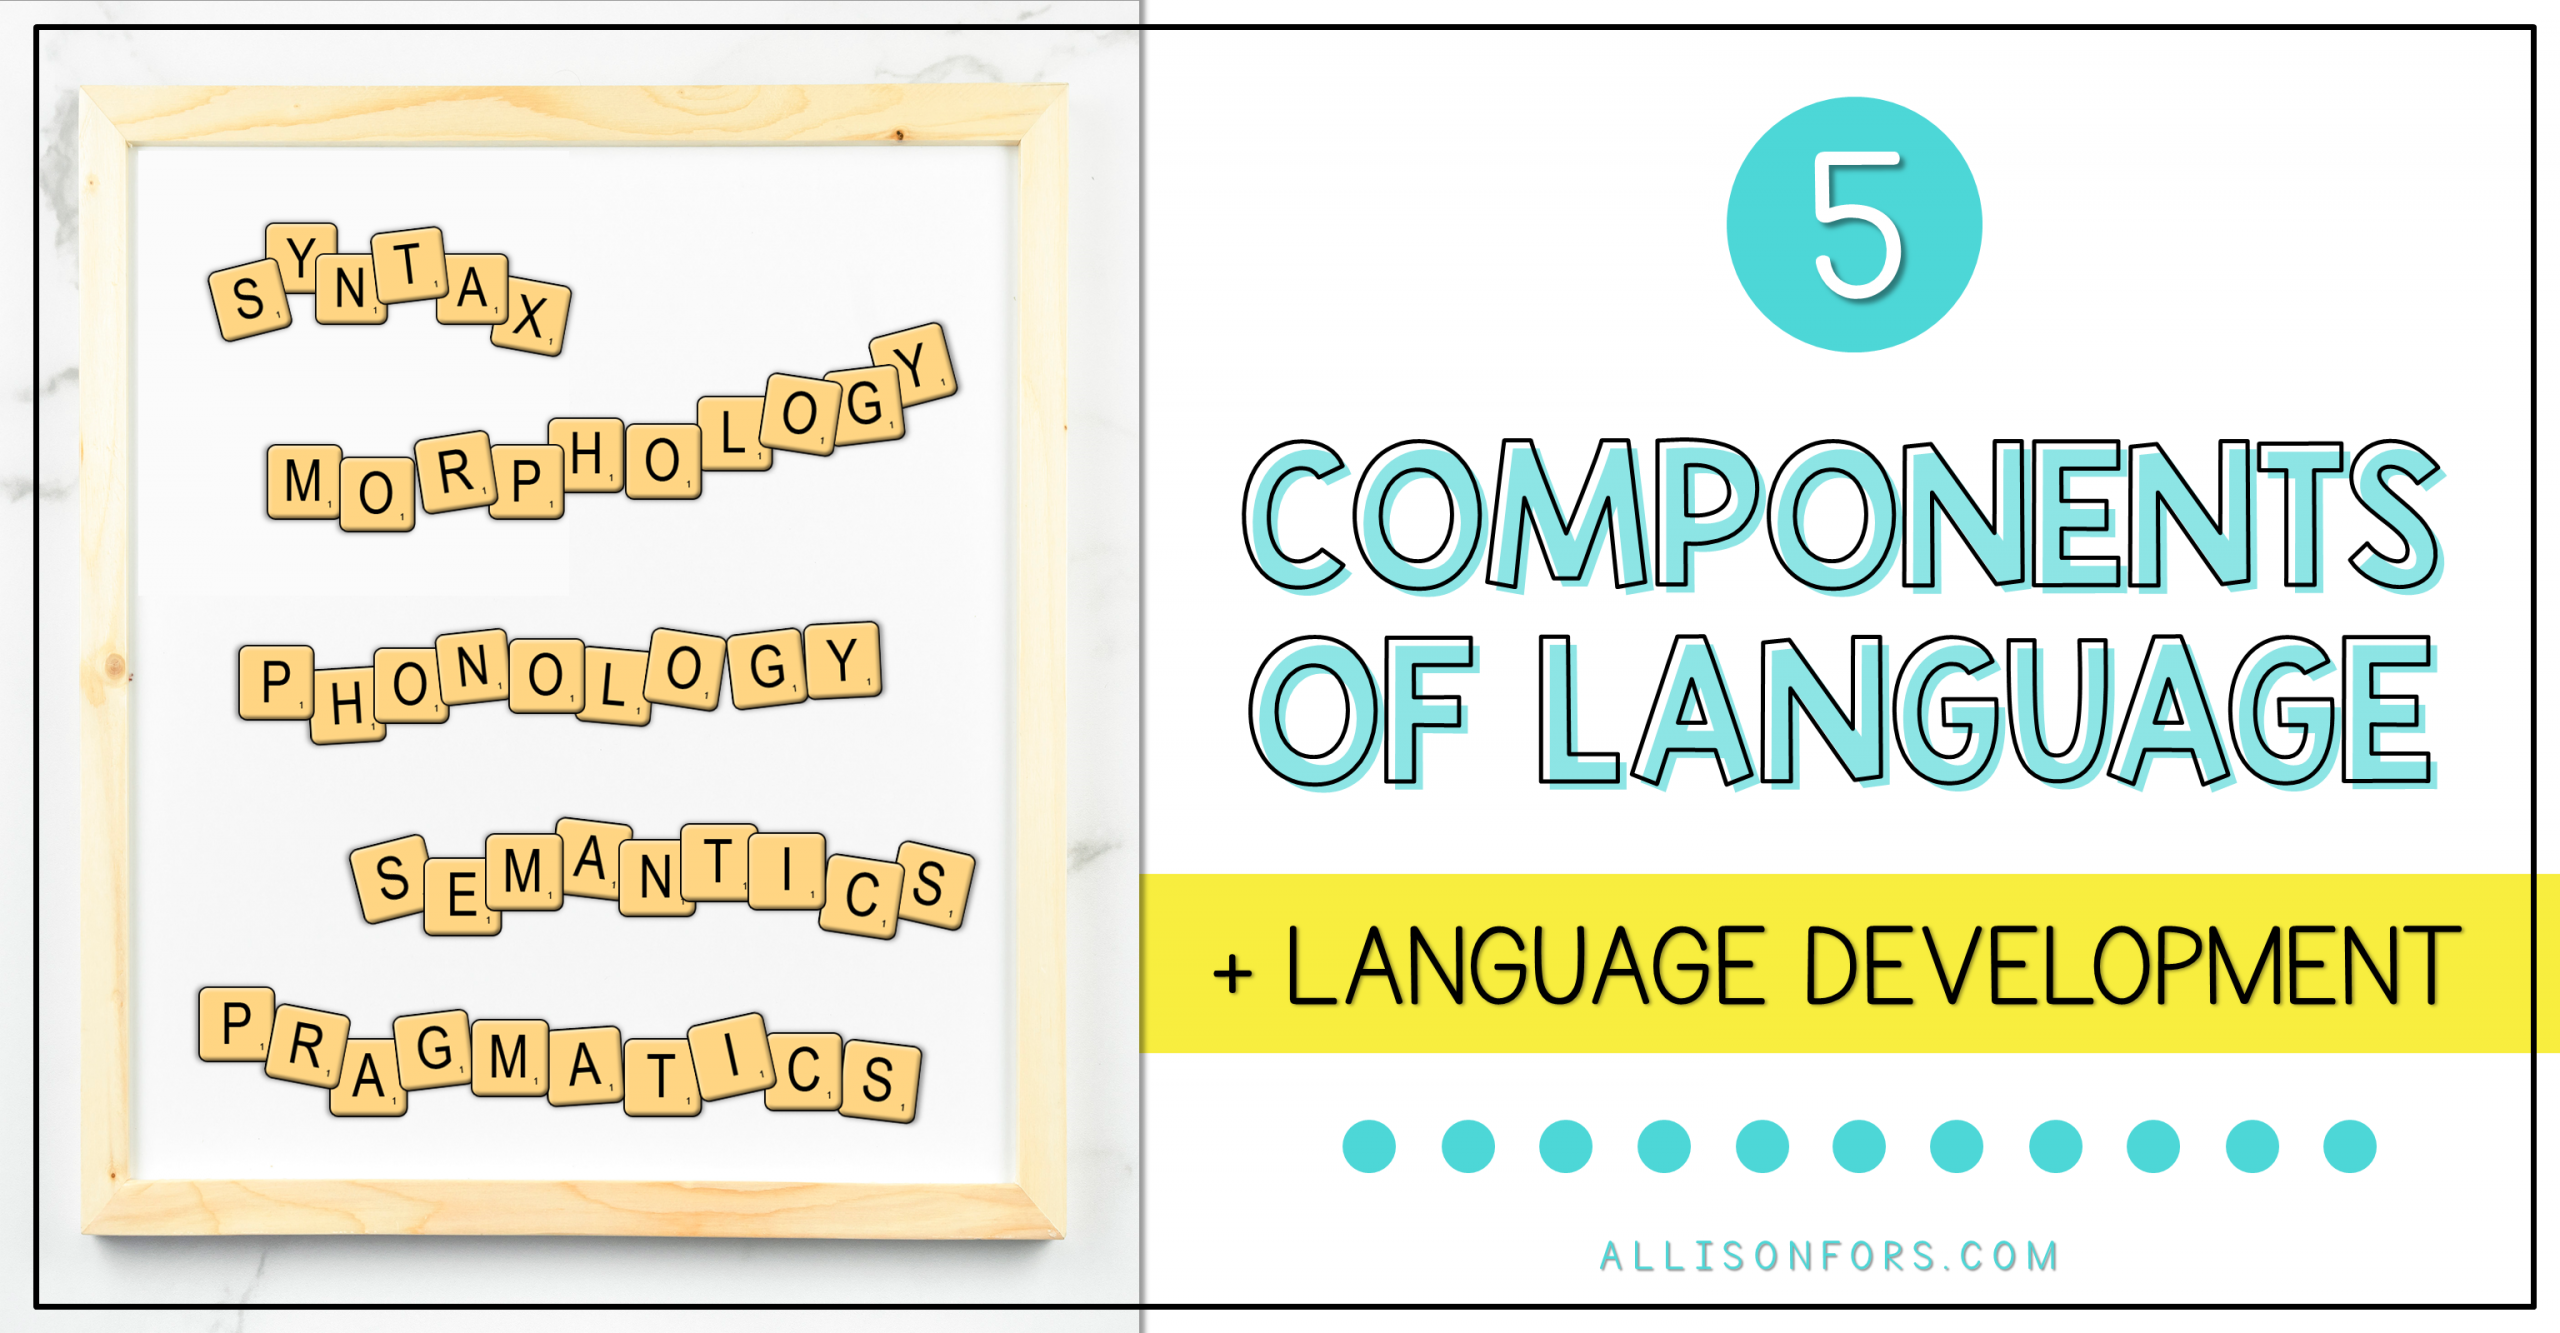 The 5 Components and Development of Language